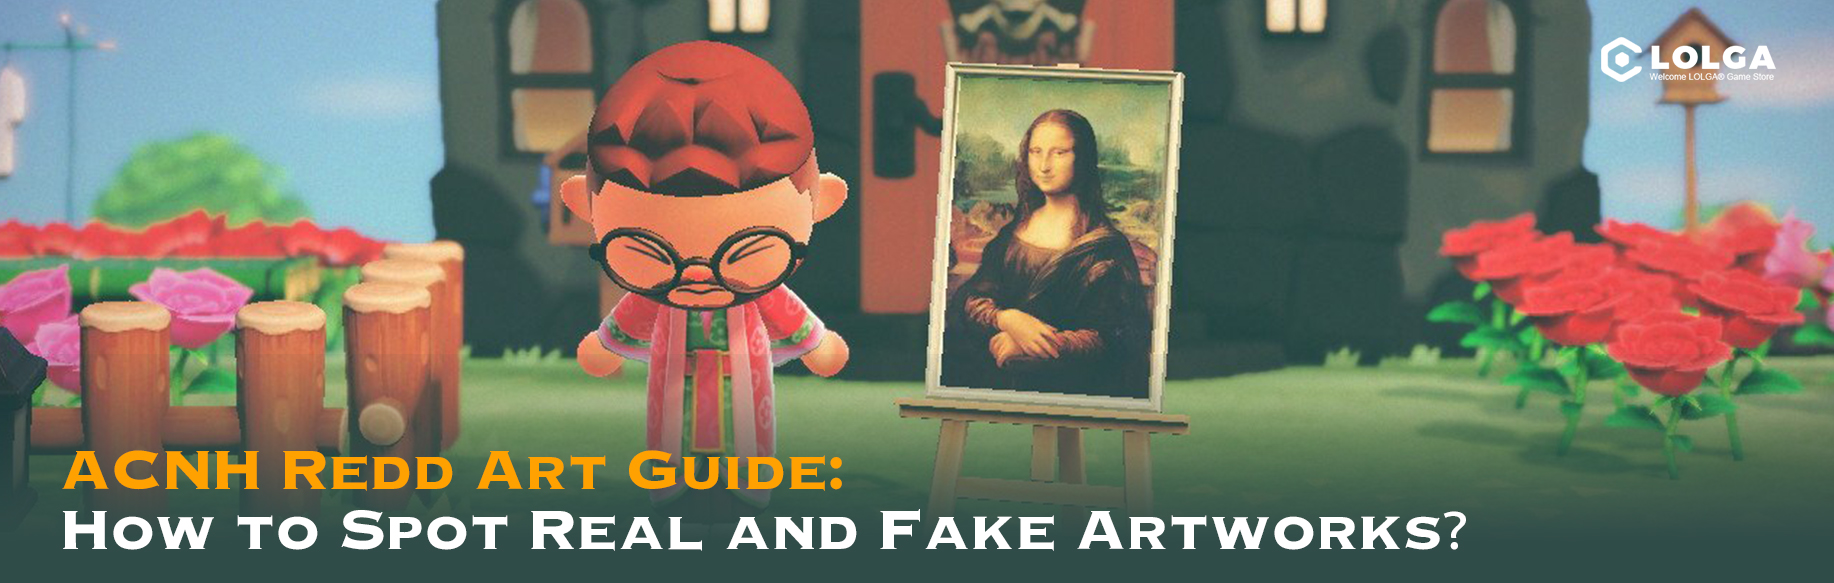 ACNH Redd Art Guide: How to Spot Real and Fake Artworks？